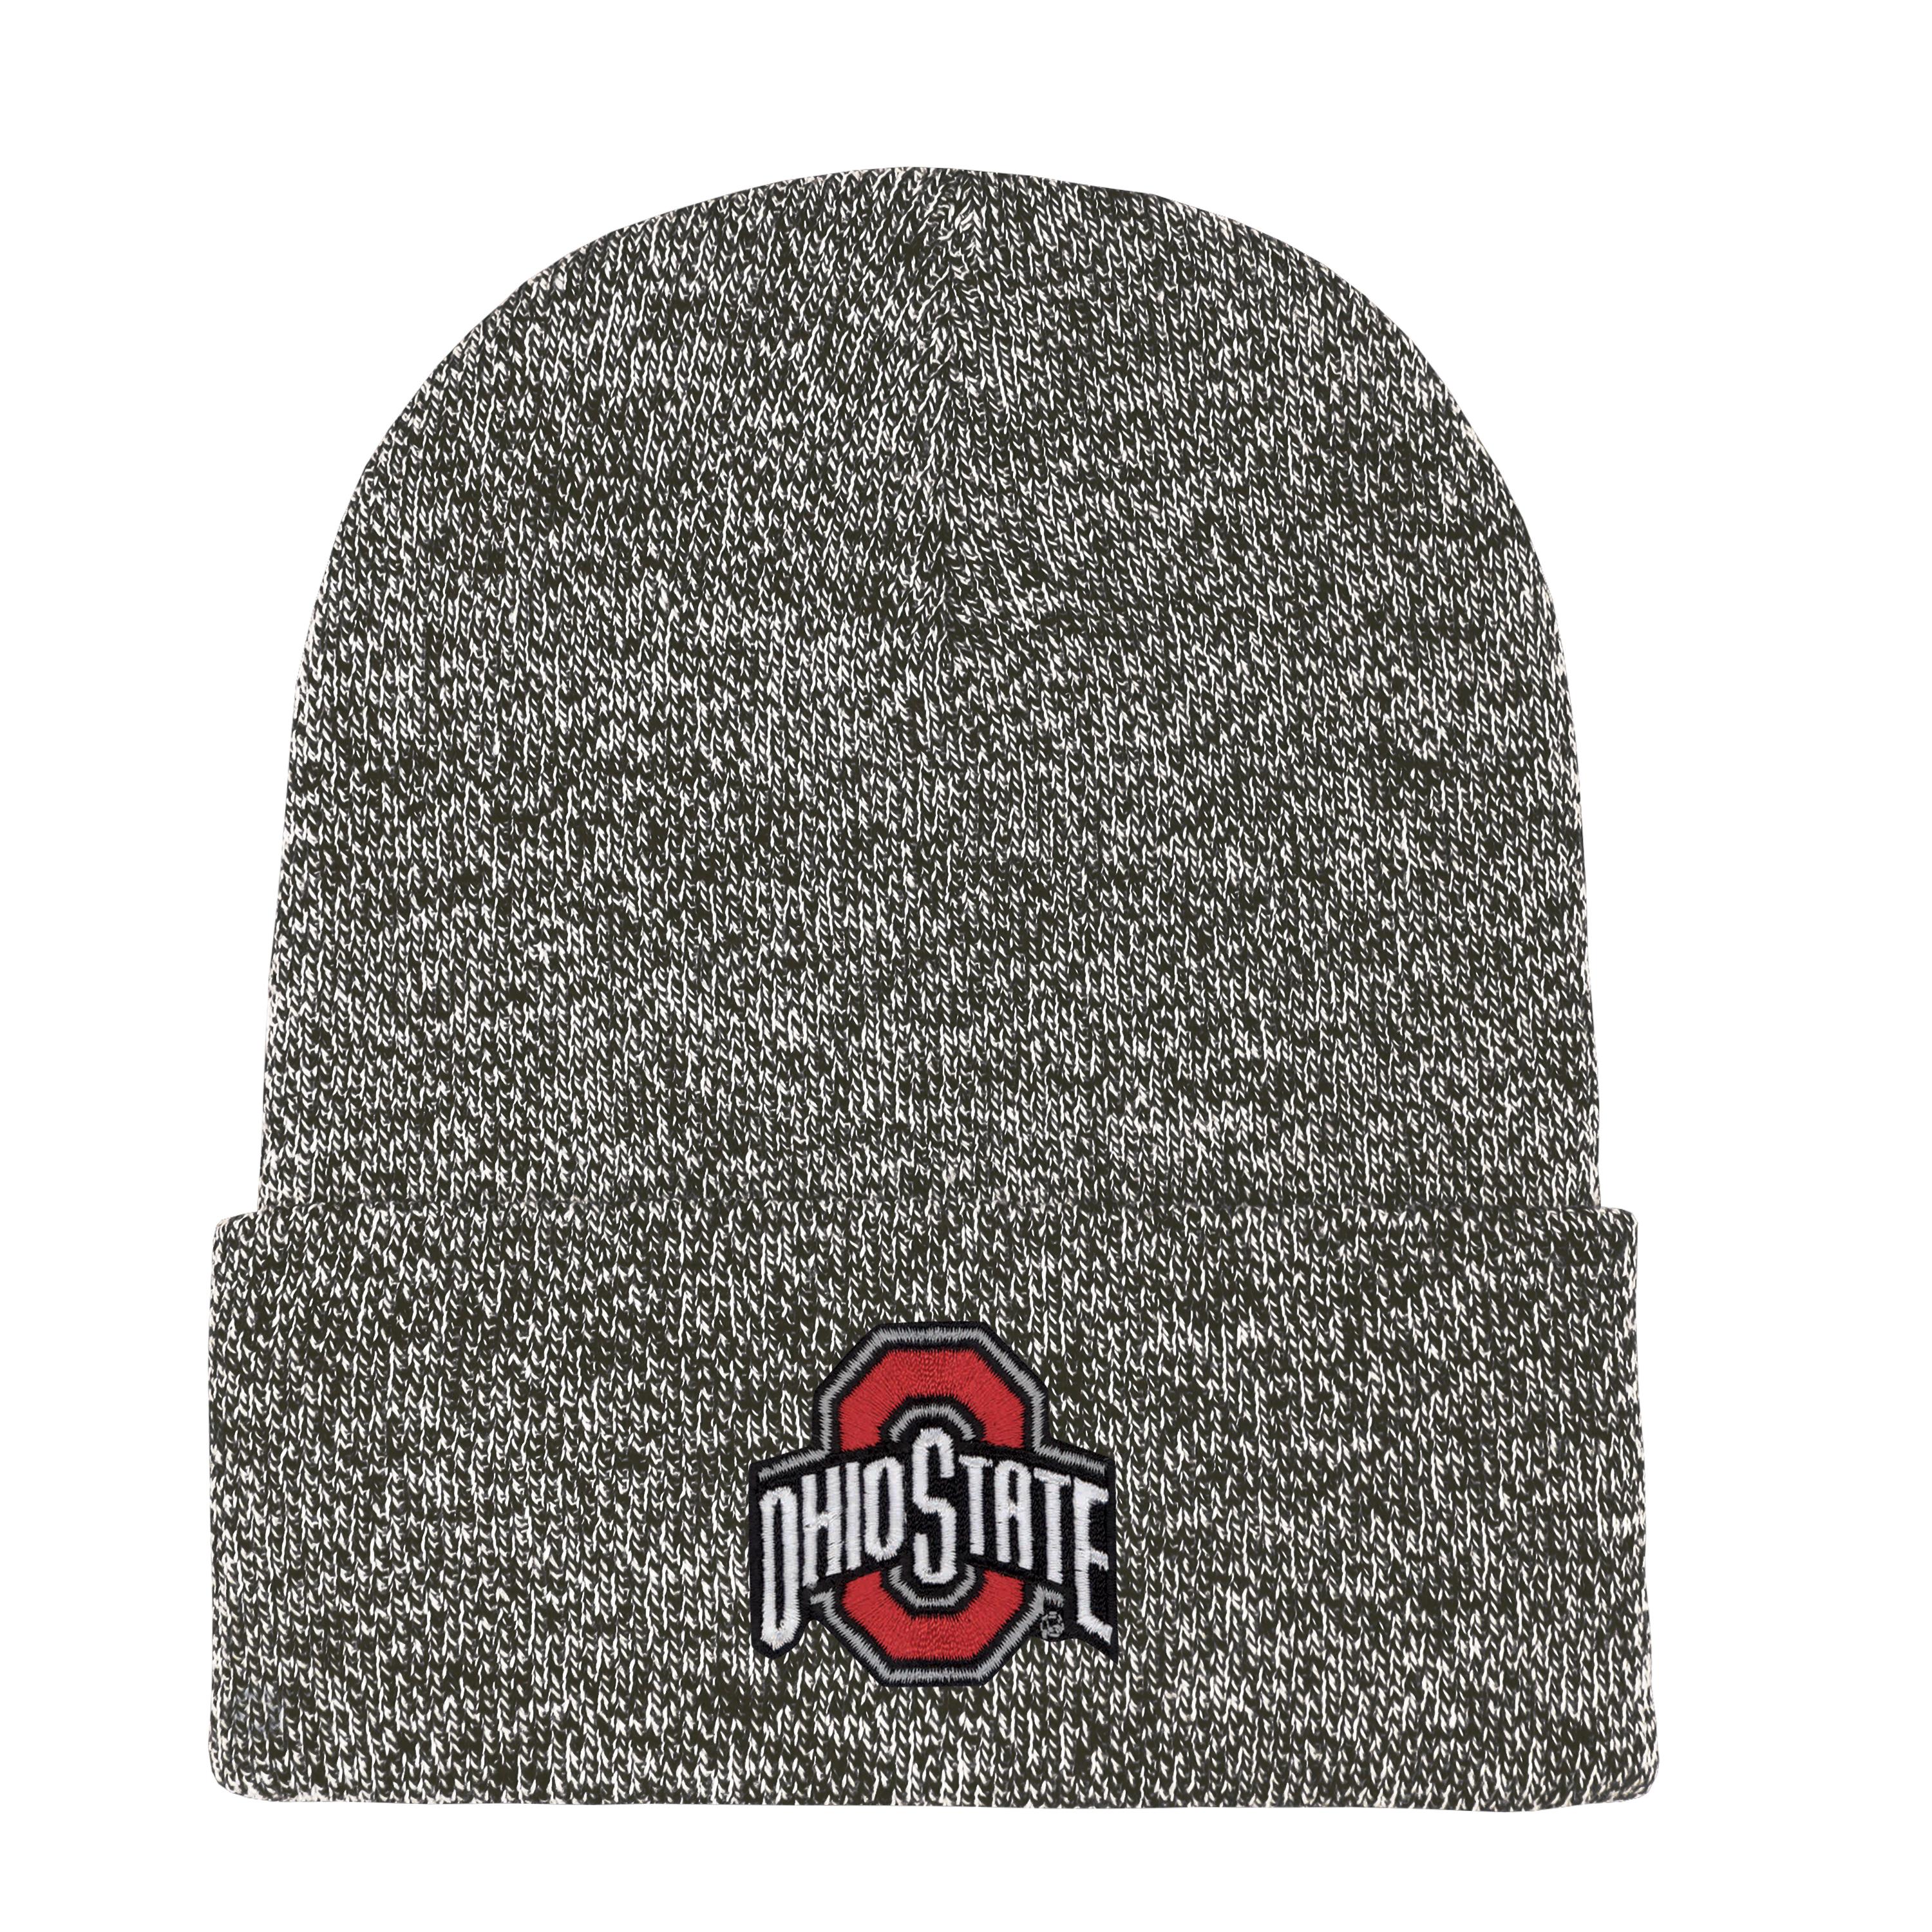 CHILL OHIO STATE UNIVERSITY GRAY KNIT BEANIE WITH CUFF